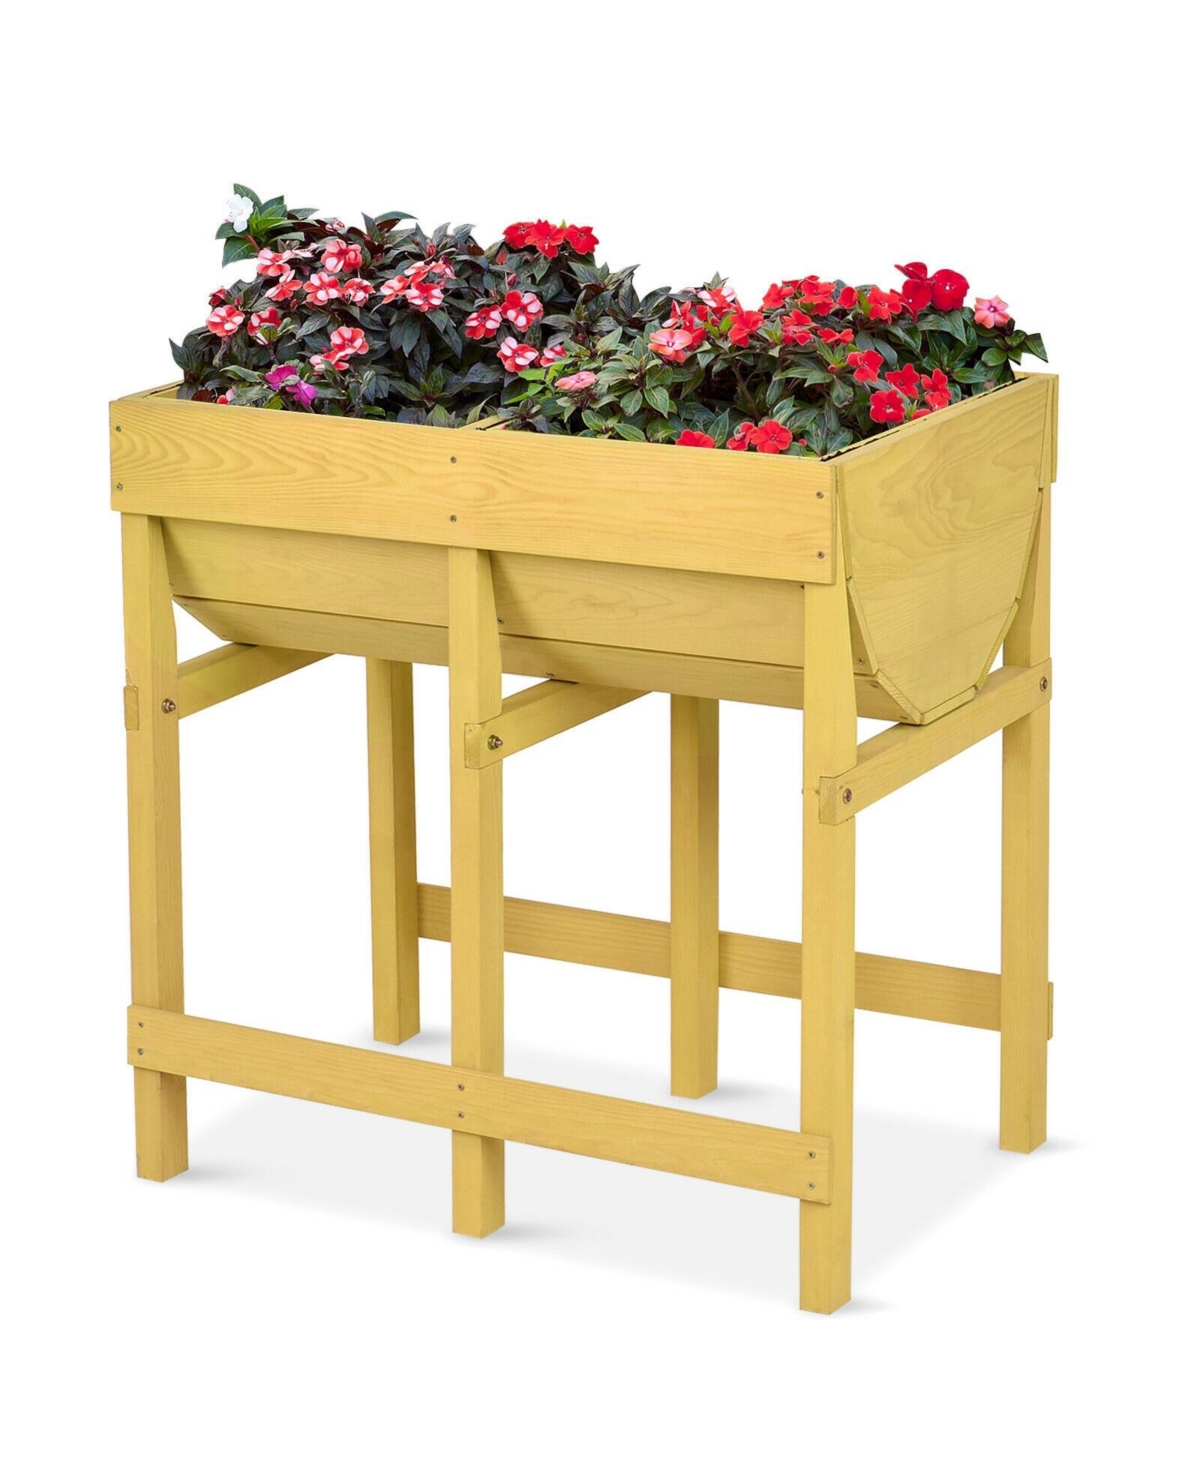 Raised Wooden Planter Vegetable Flower Bed with Liner - Yellow